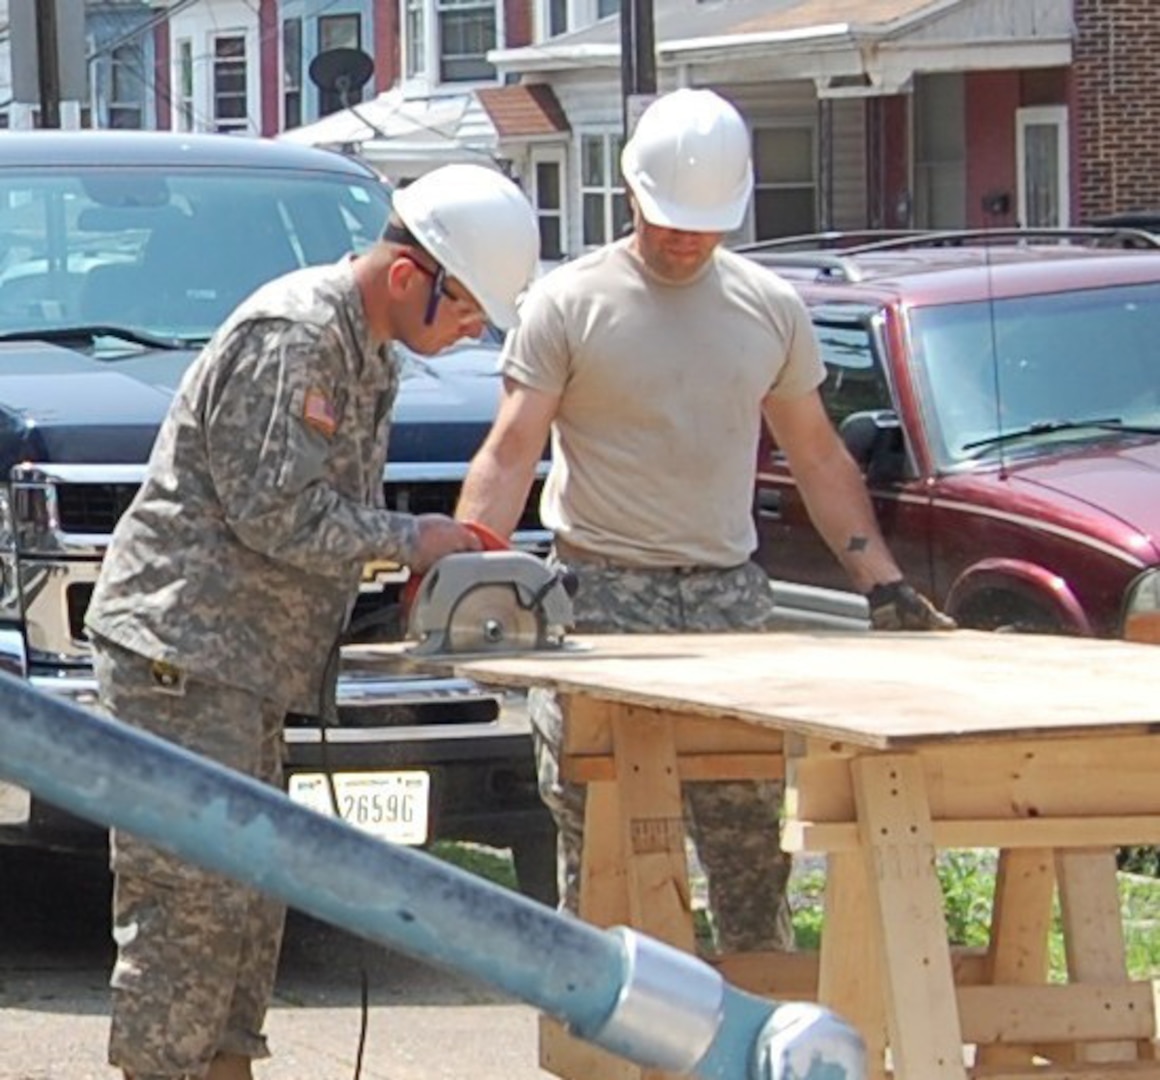 First Lt. Chad Korrel, Pennsylvania Army National Guard Medical Detachment, and Sgt. Derek Kessler, 2nd Battalion, 112th Infantry Regiment, 56th Stryker Brigade, 28th Infantry Division, cut boards to place over the windows and doors of condemned buildings in Harrisburg, Pa. The project was intended to secure the structures from vandals and drug abusers.